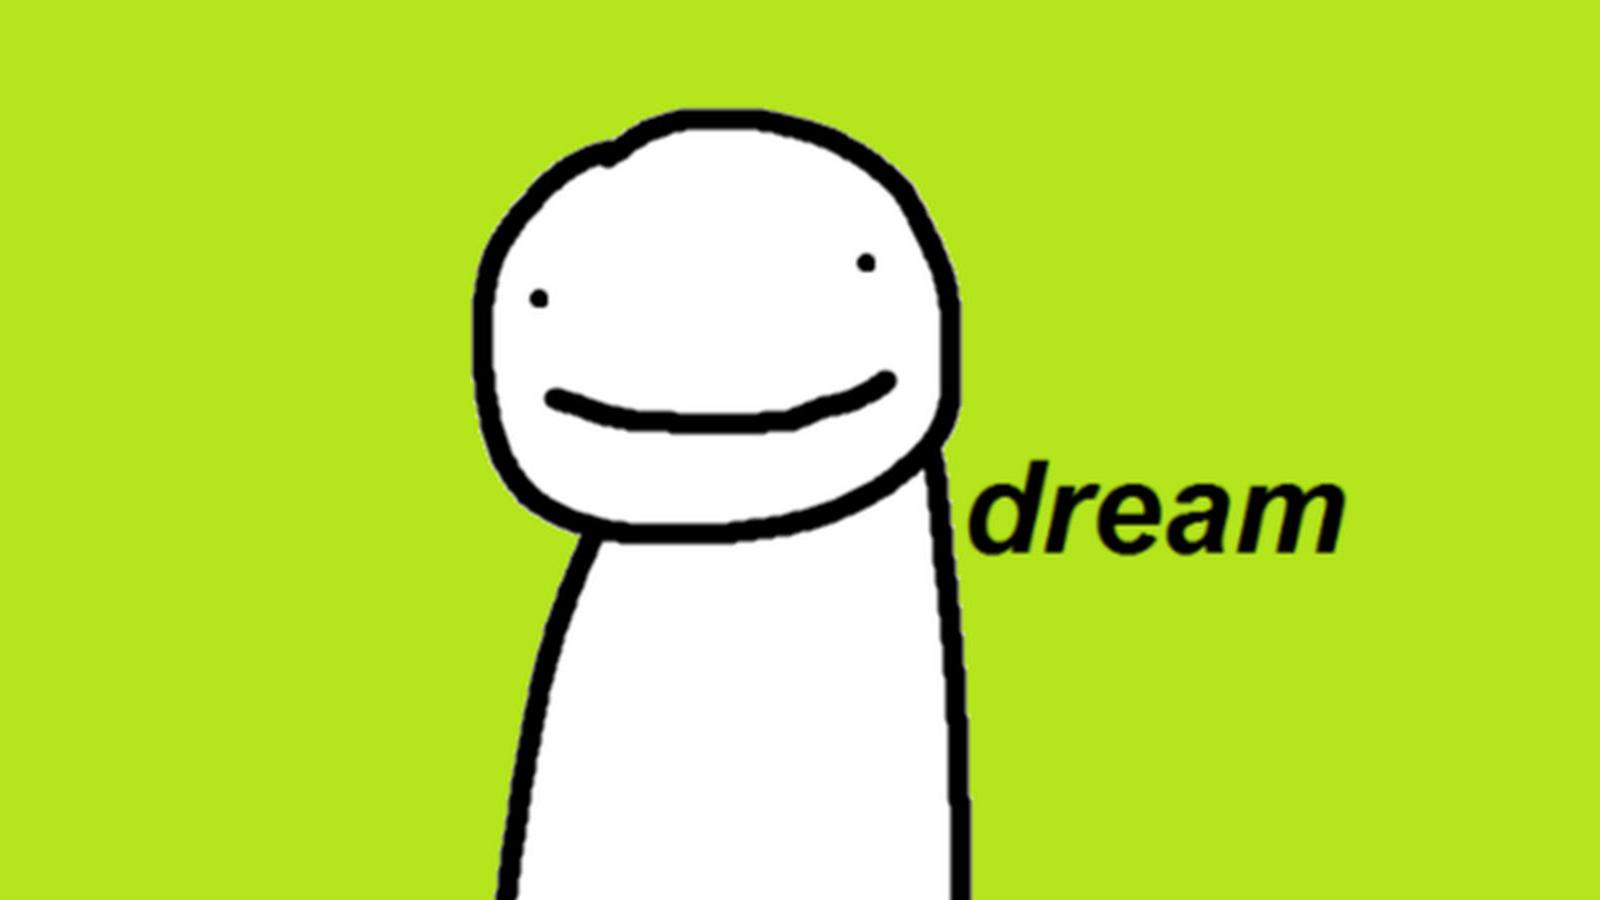 Dream's avatar is shown against a green background.